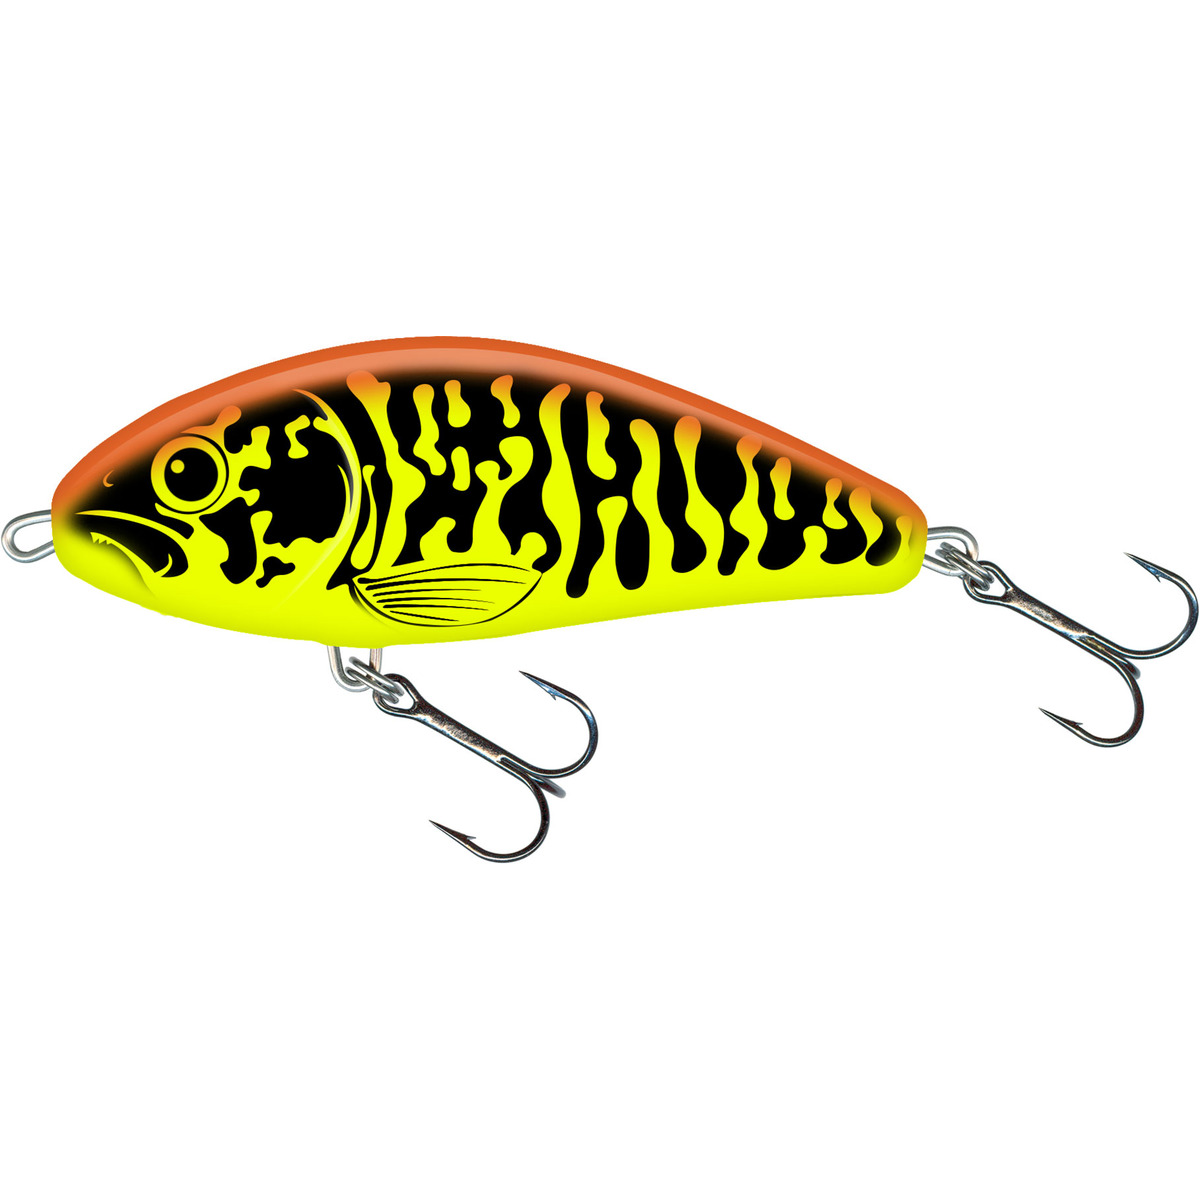 Salmo Fatso 14 Cm Sinking Limited Edition Colours - Bright Pike